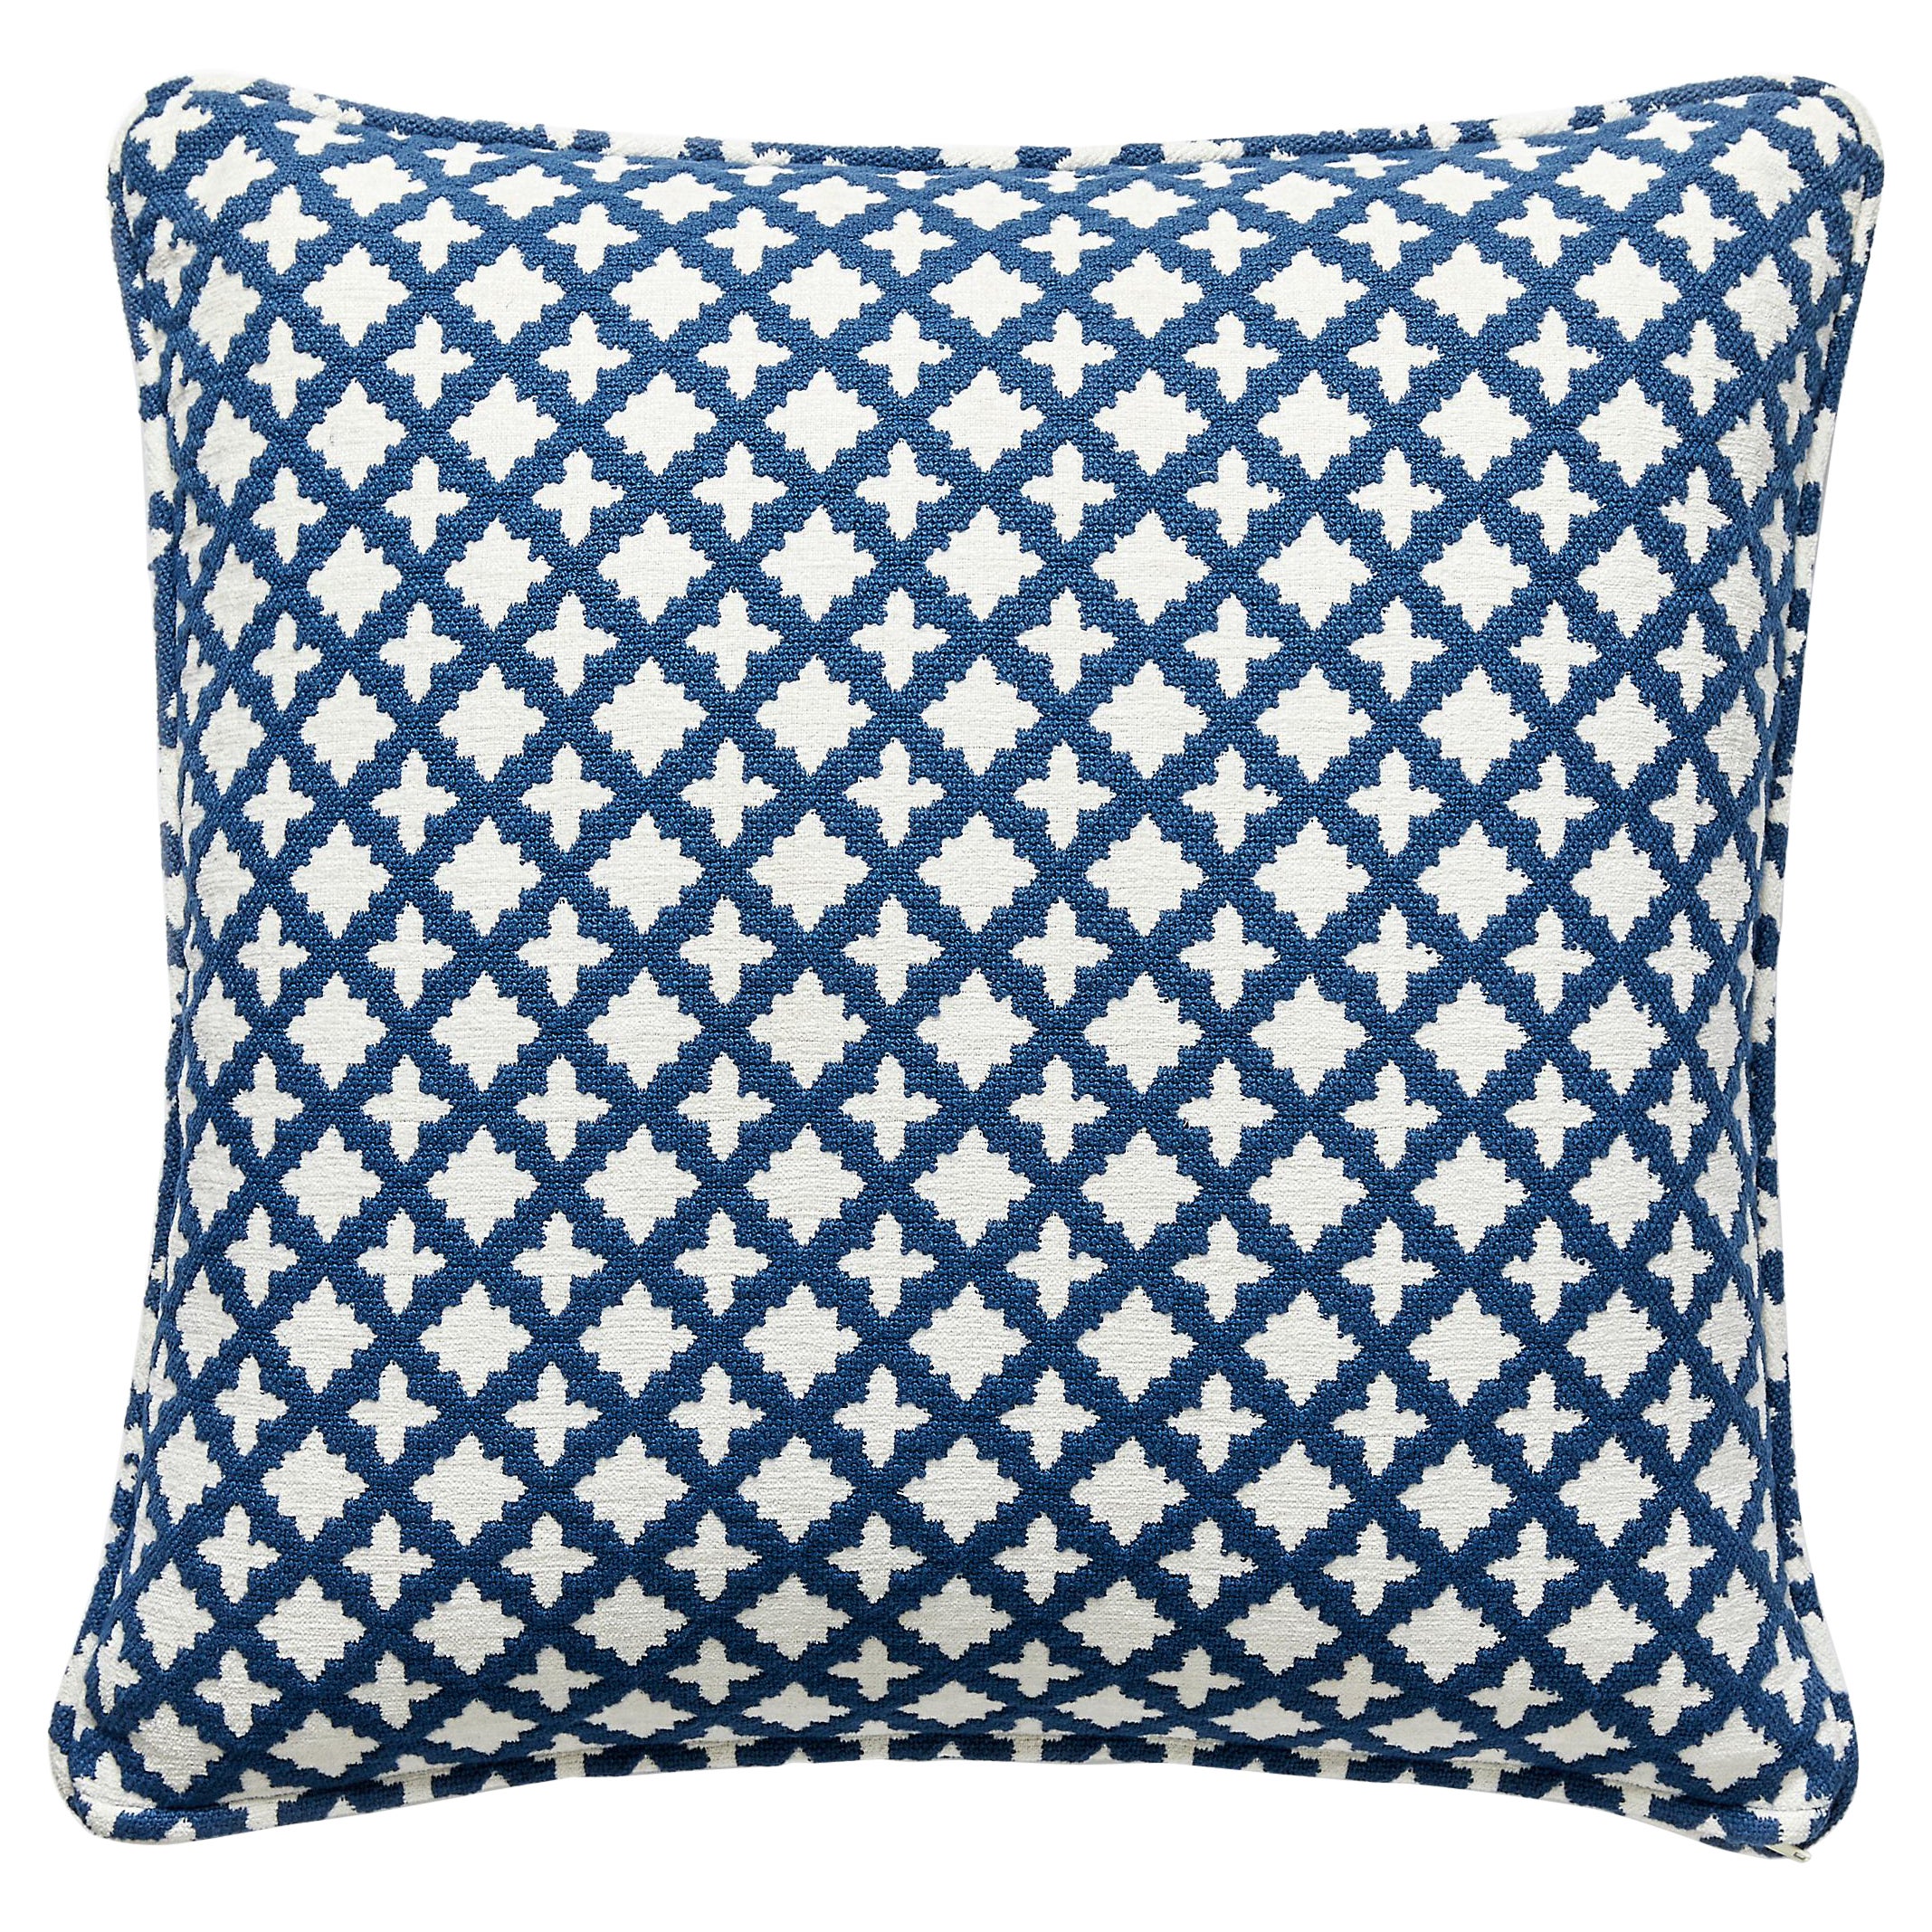 Marrakesh Weave Pillow For Sale